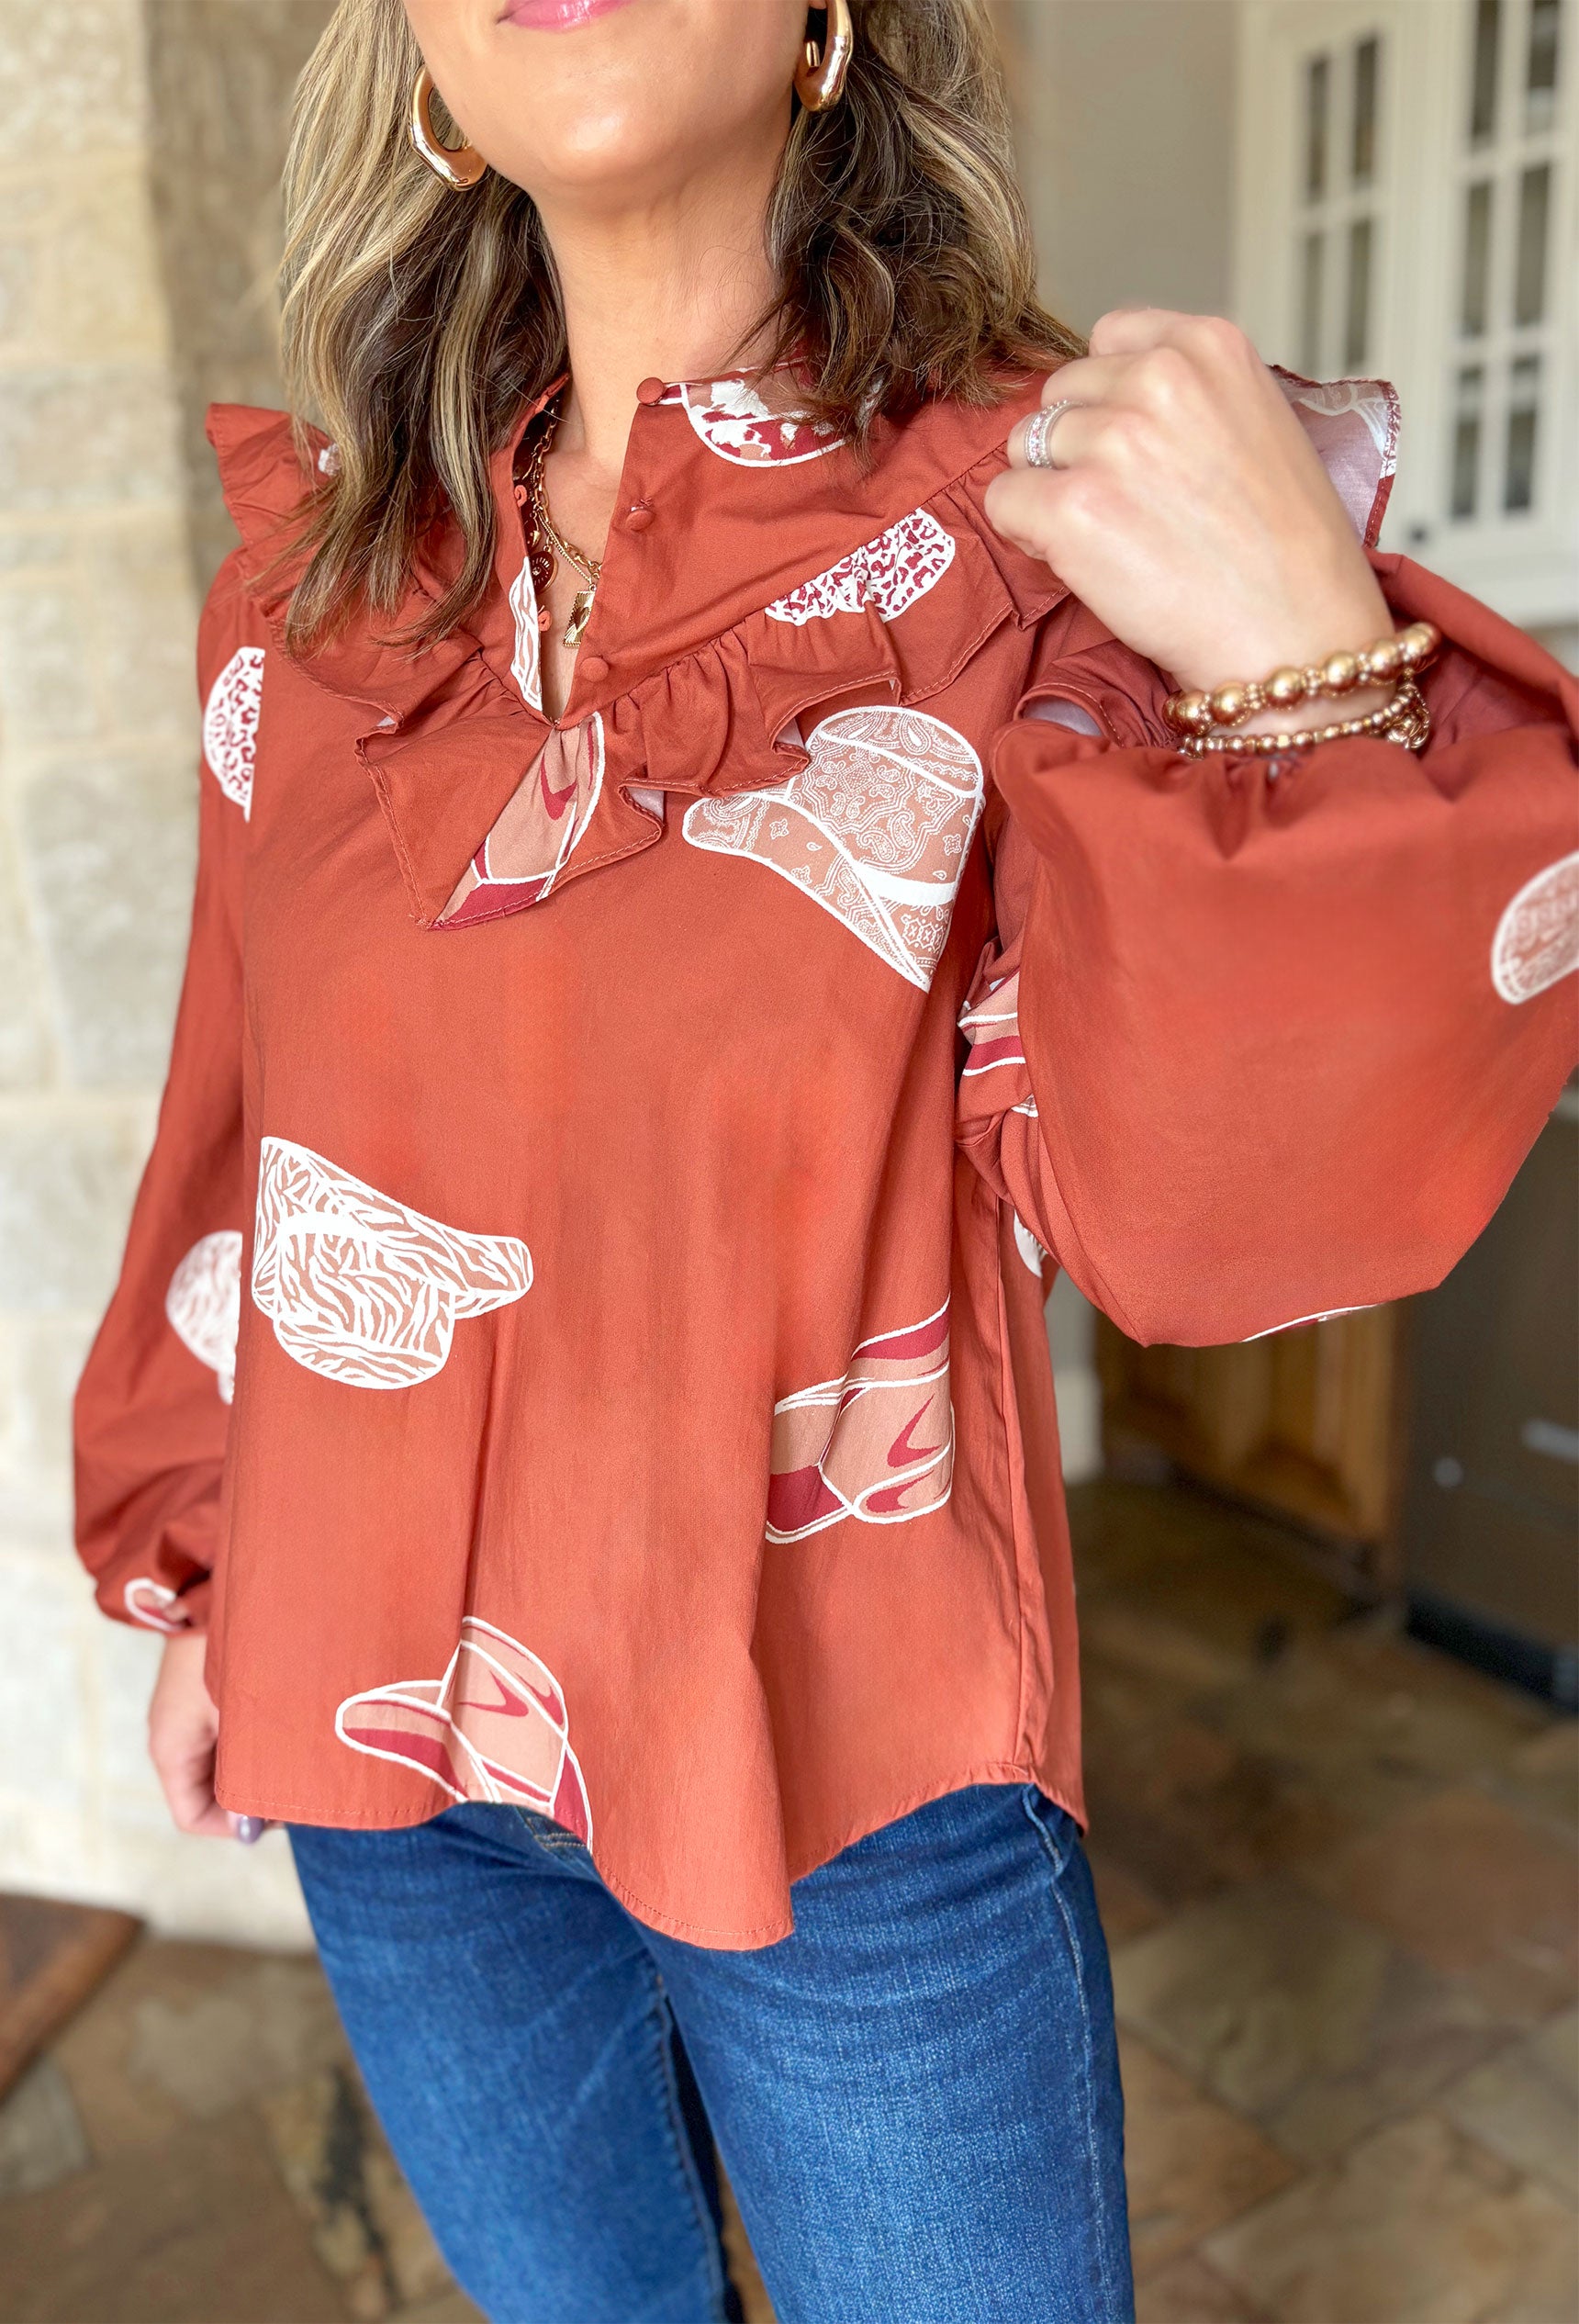 Cowboy Take Me Away Blouse, burnt orange blouse with ruffling across the chest and graphic cowboy hats all over the blouse